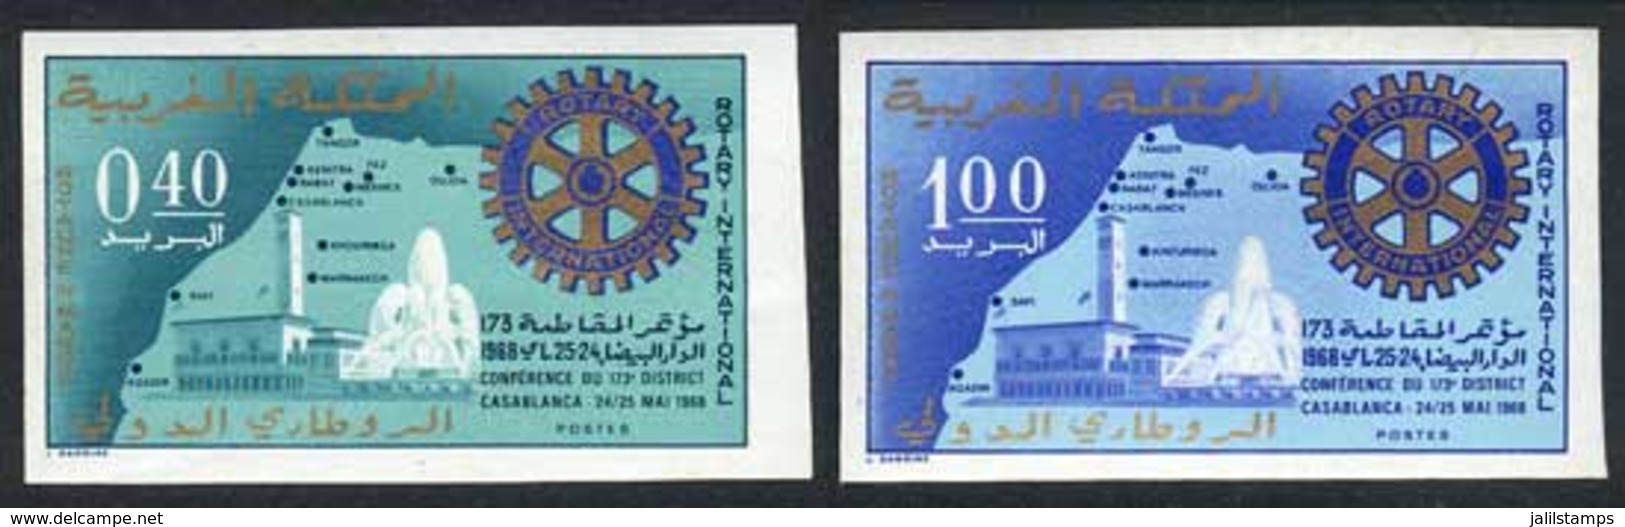 MOROCCO: Sc.193/4, 1968 Rotary, Maps, Set Of 2 Values IMPERFORATE, VF! - Morocco (1956-...)